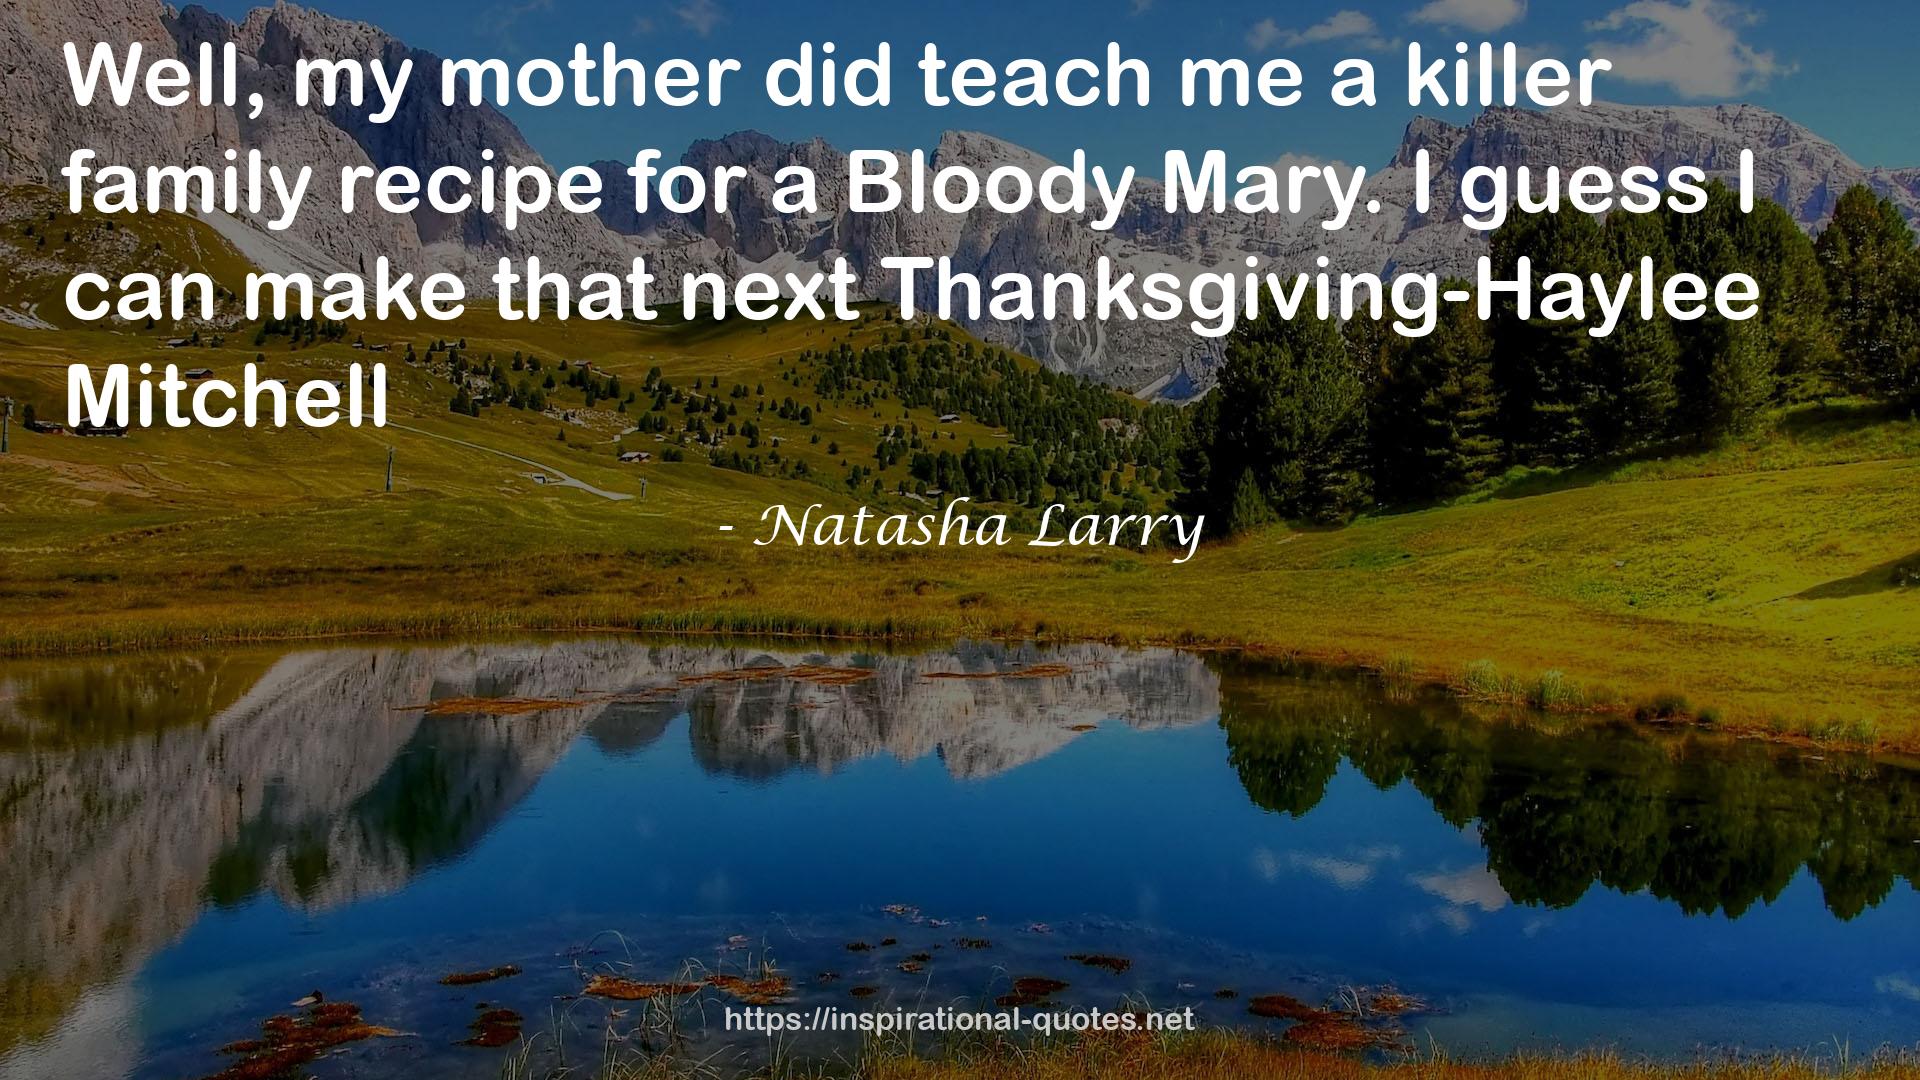 Natasha Larry quote : Well, my mother did teach me a killer family recipe for a Bloody Mary. I guess I can make that next Thanksgiving-Haylee Mitchell